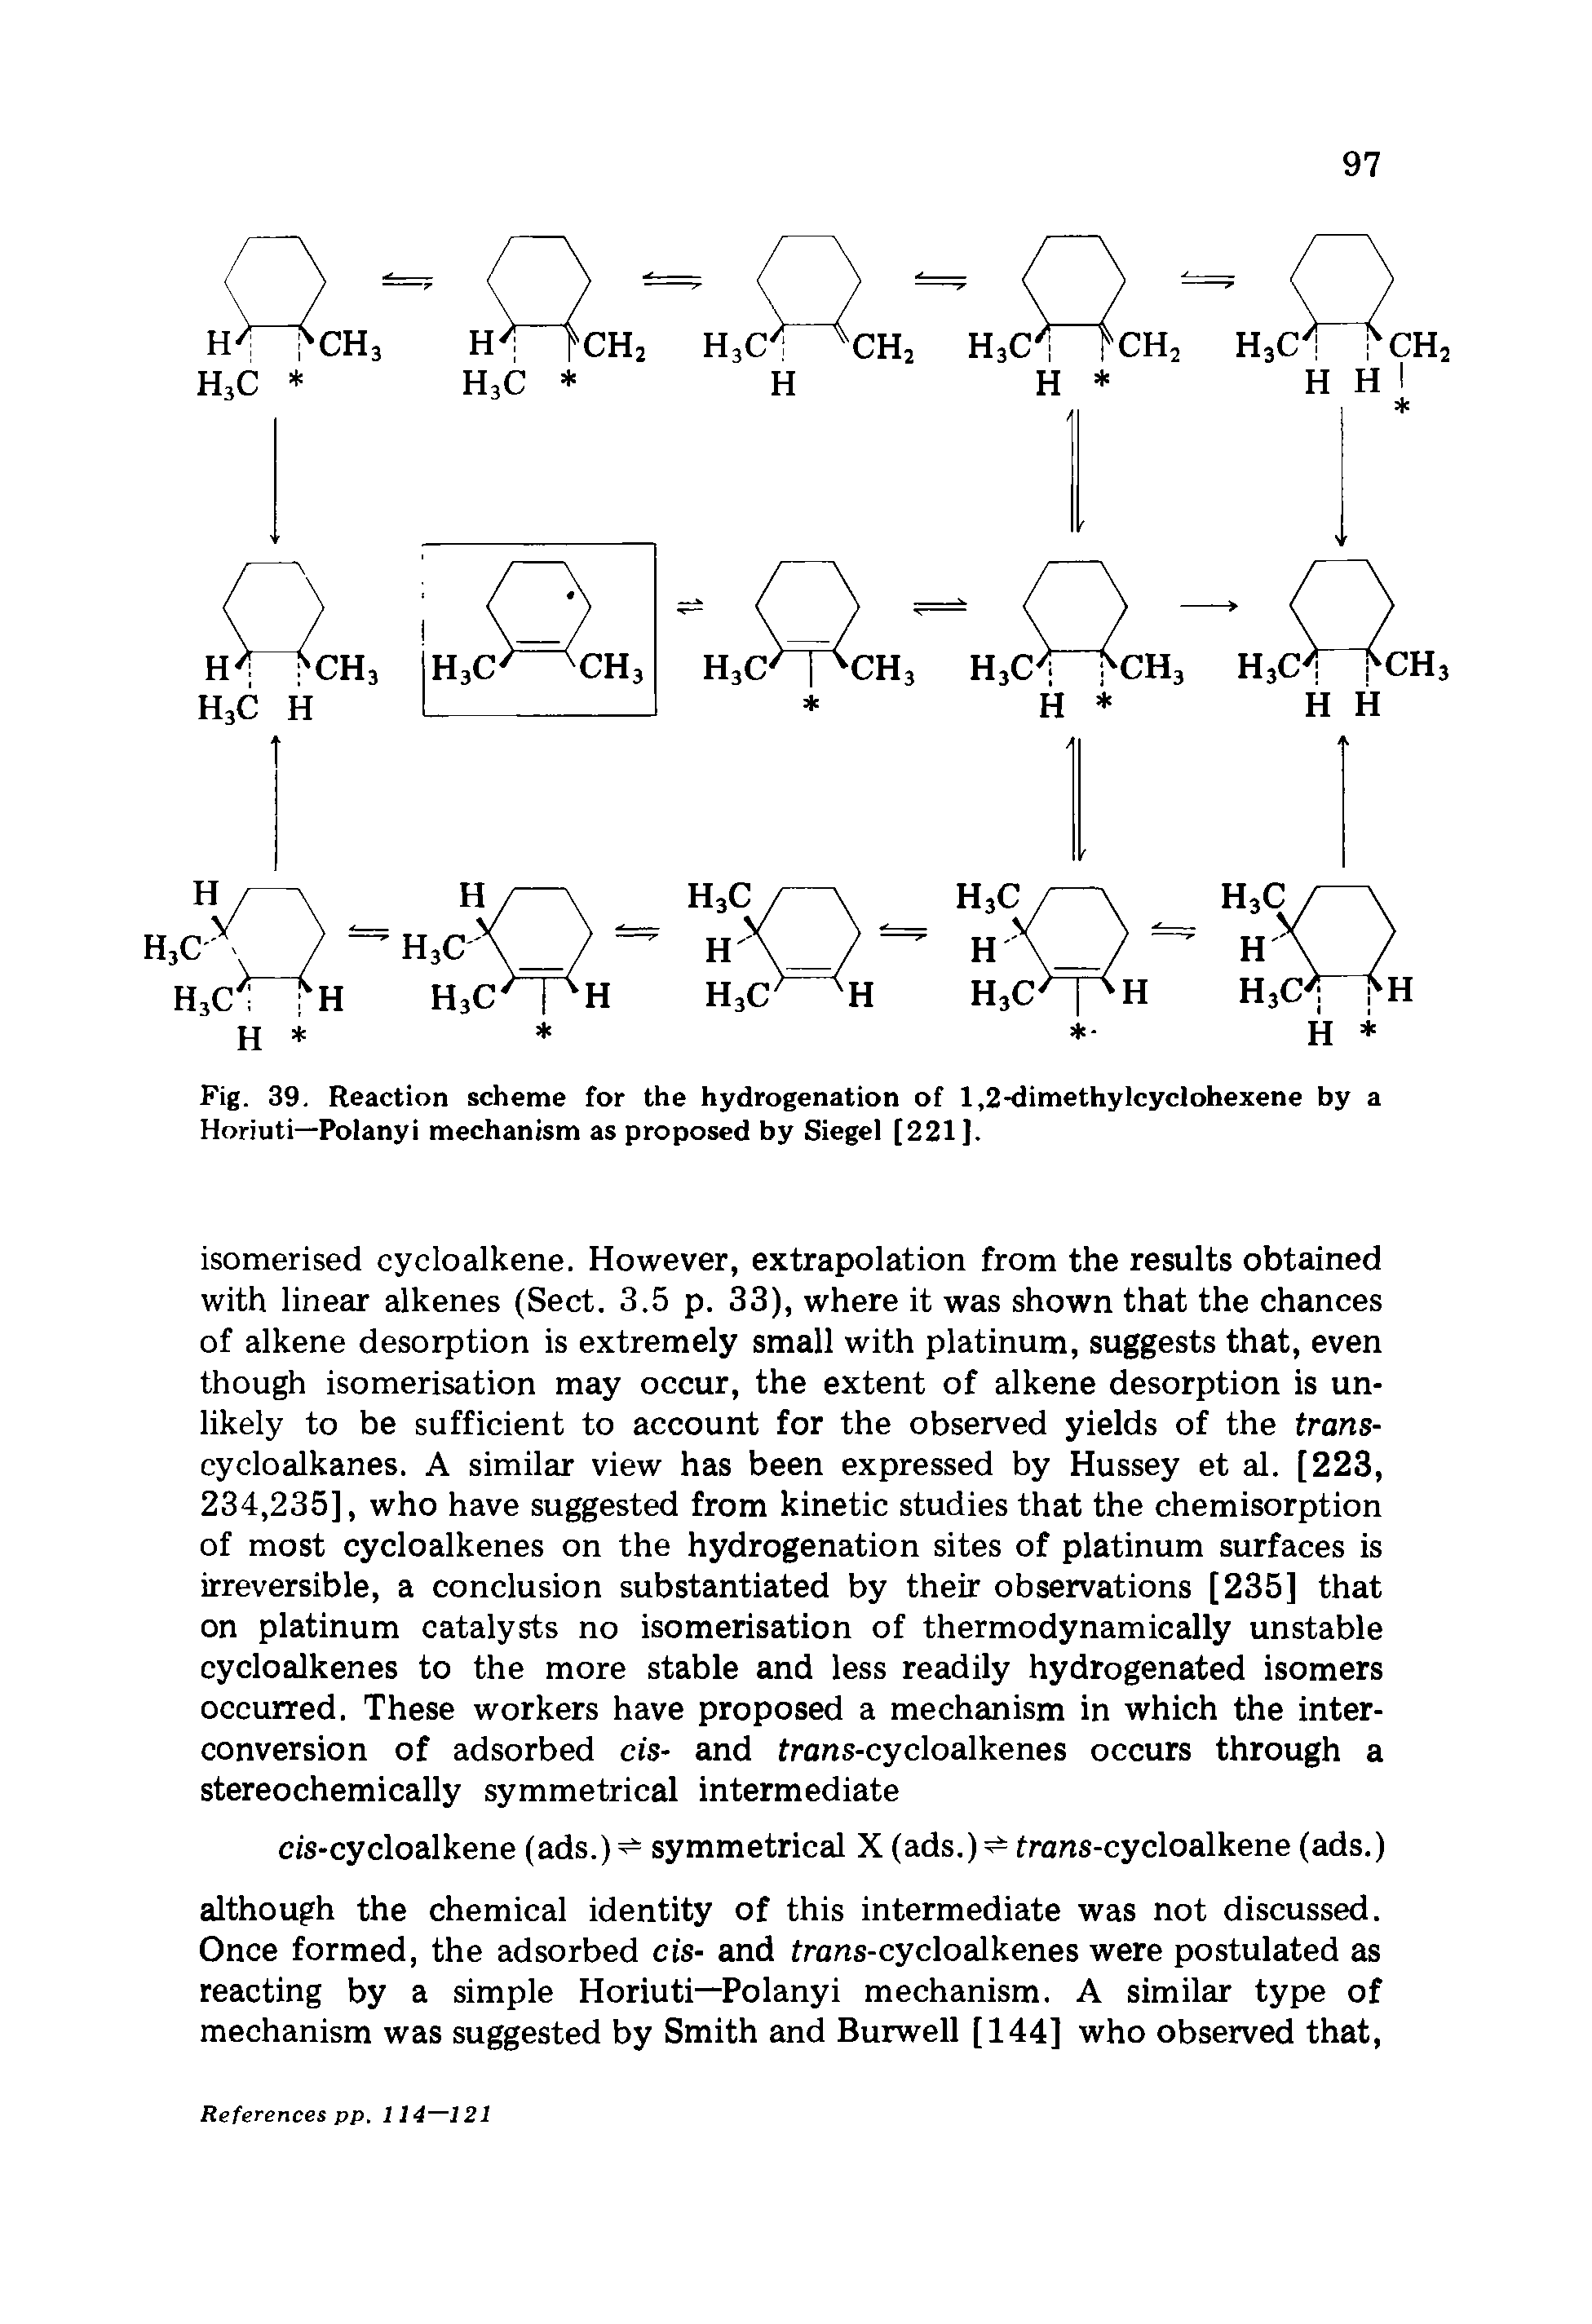 Fig. 39. Reaction scheme for the hydrogenation of 1,2-dimethylcyclohexene by a Horiuti—Polanyi mechanism as proposed by Siegel [221].